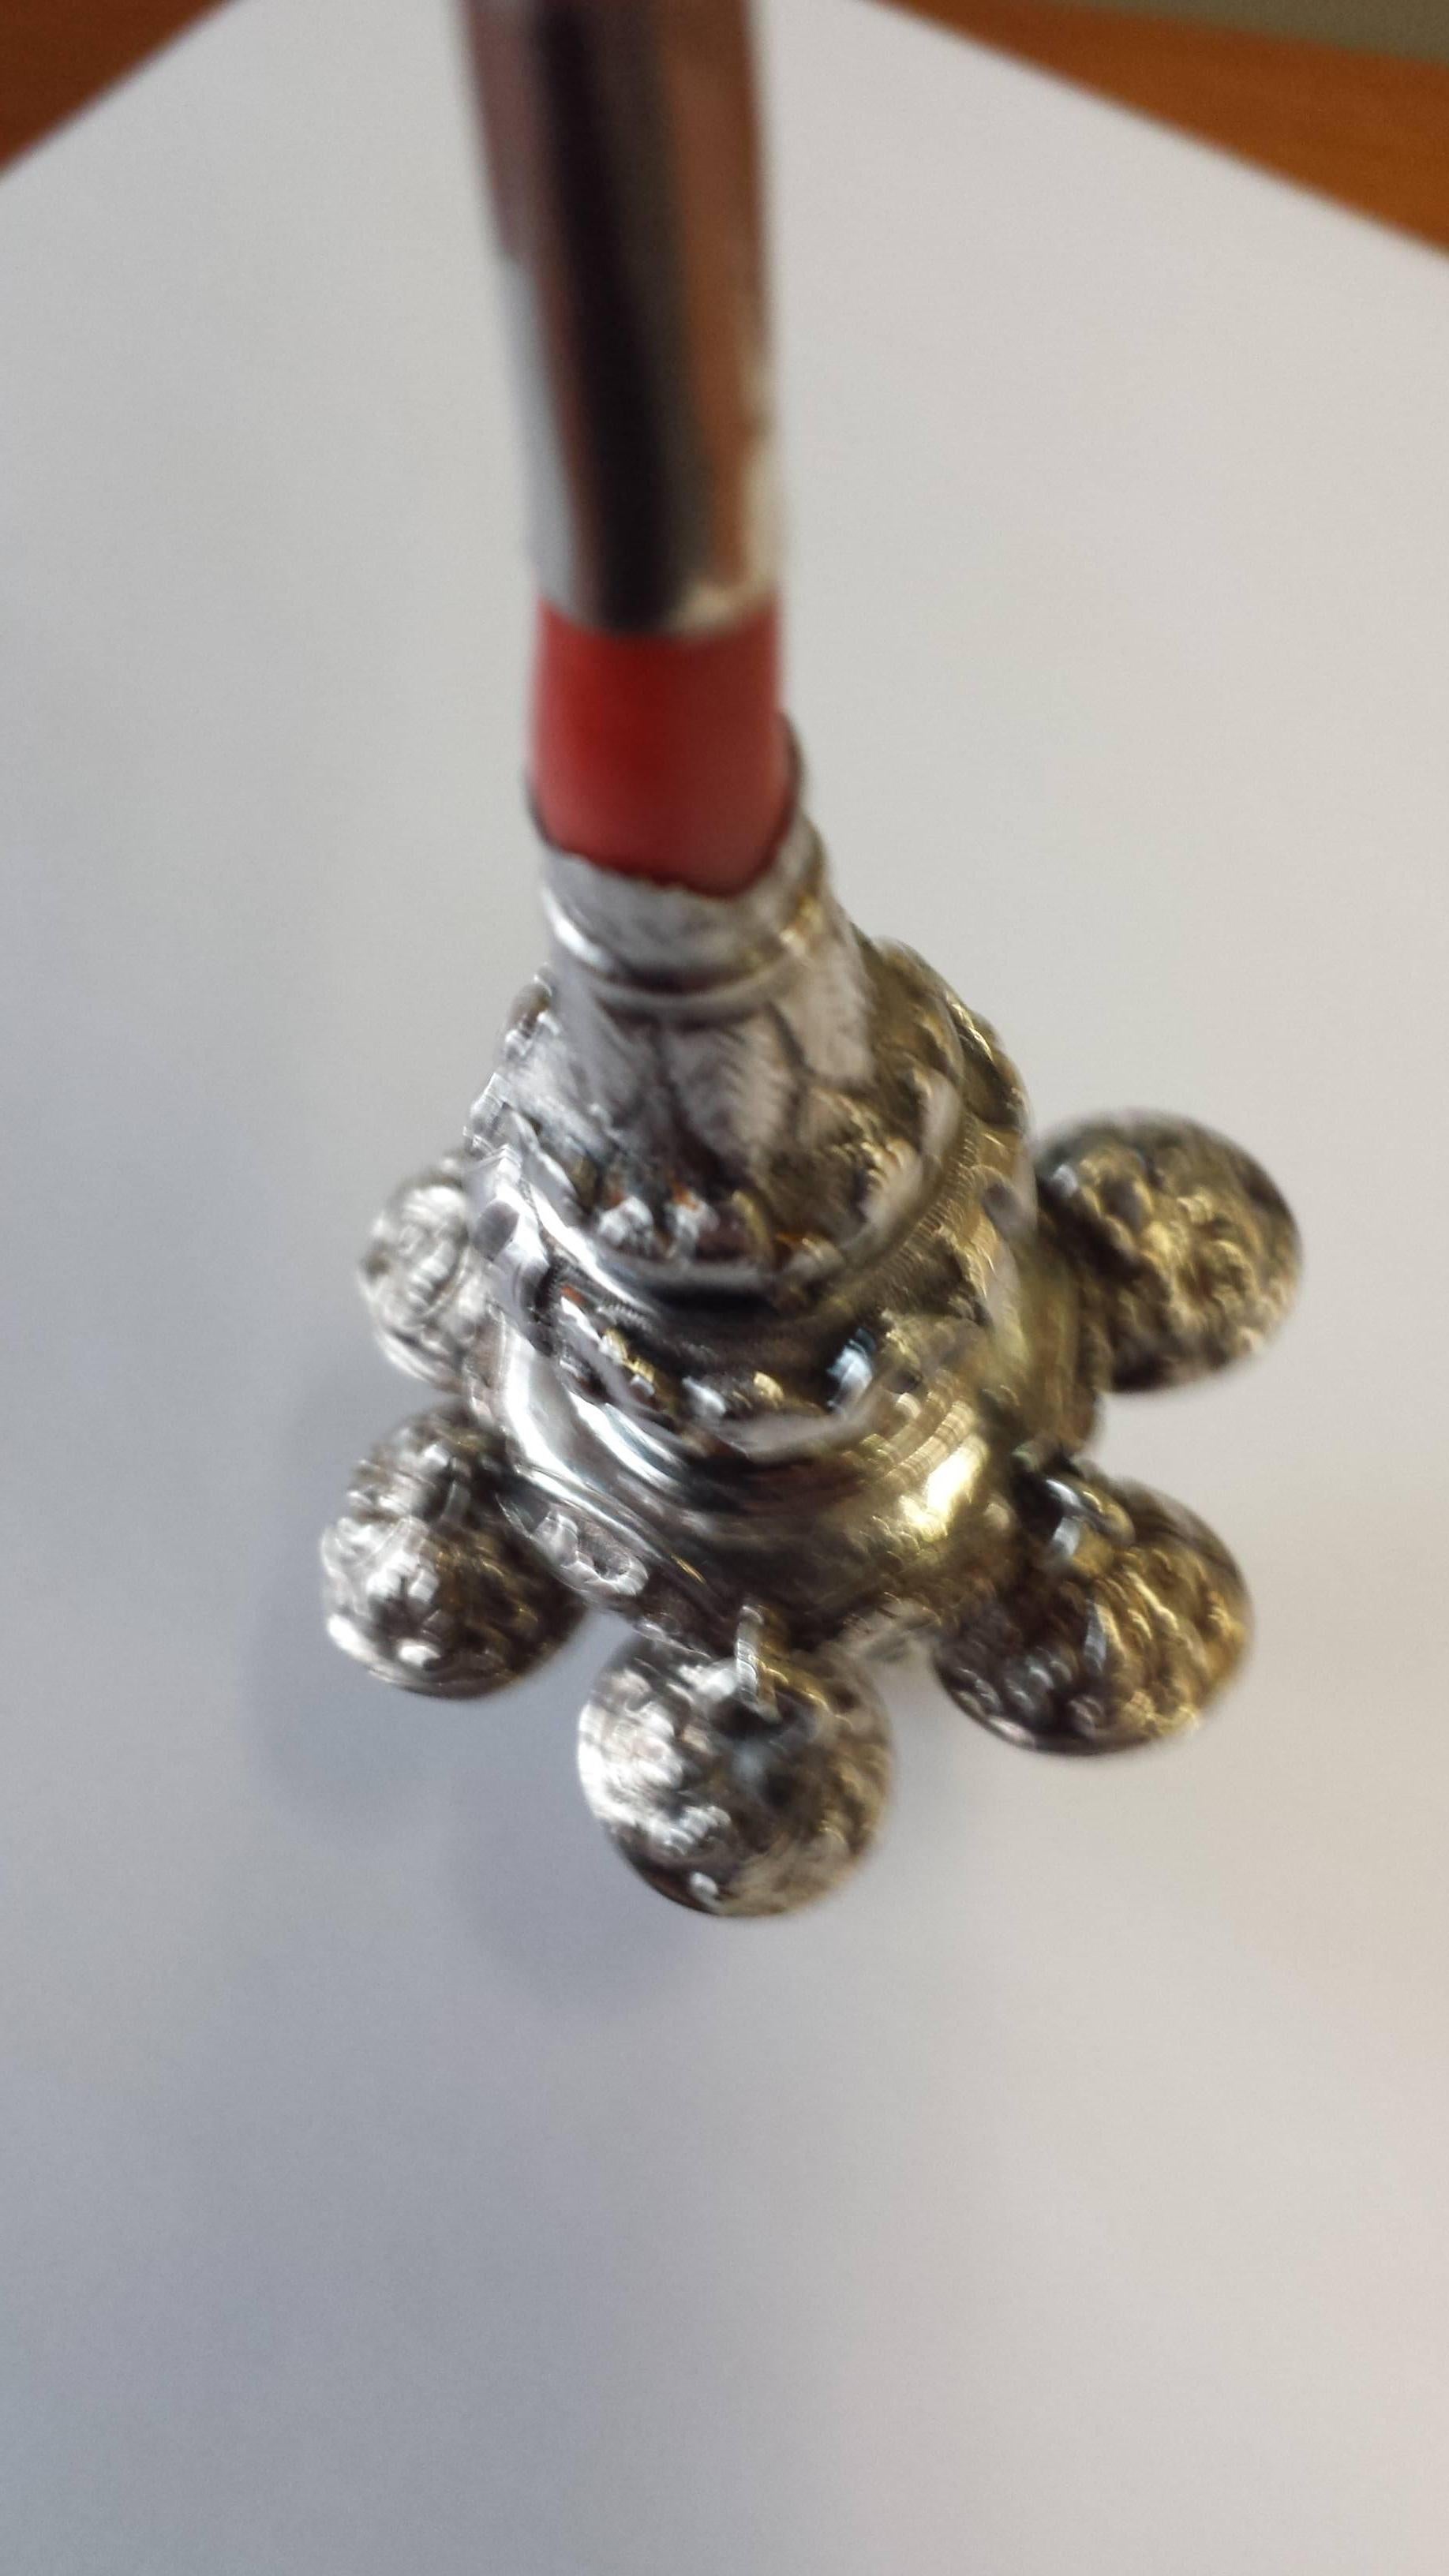 Mid-19th Century Late Georgian Coral & Sterling Silver Baby Rattle & Teether Birmingham 1834-1835